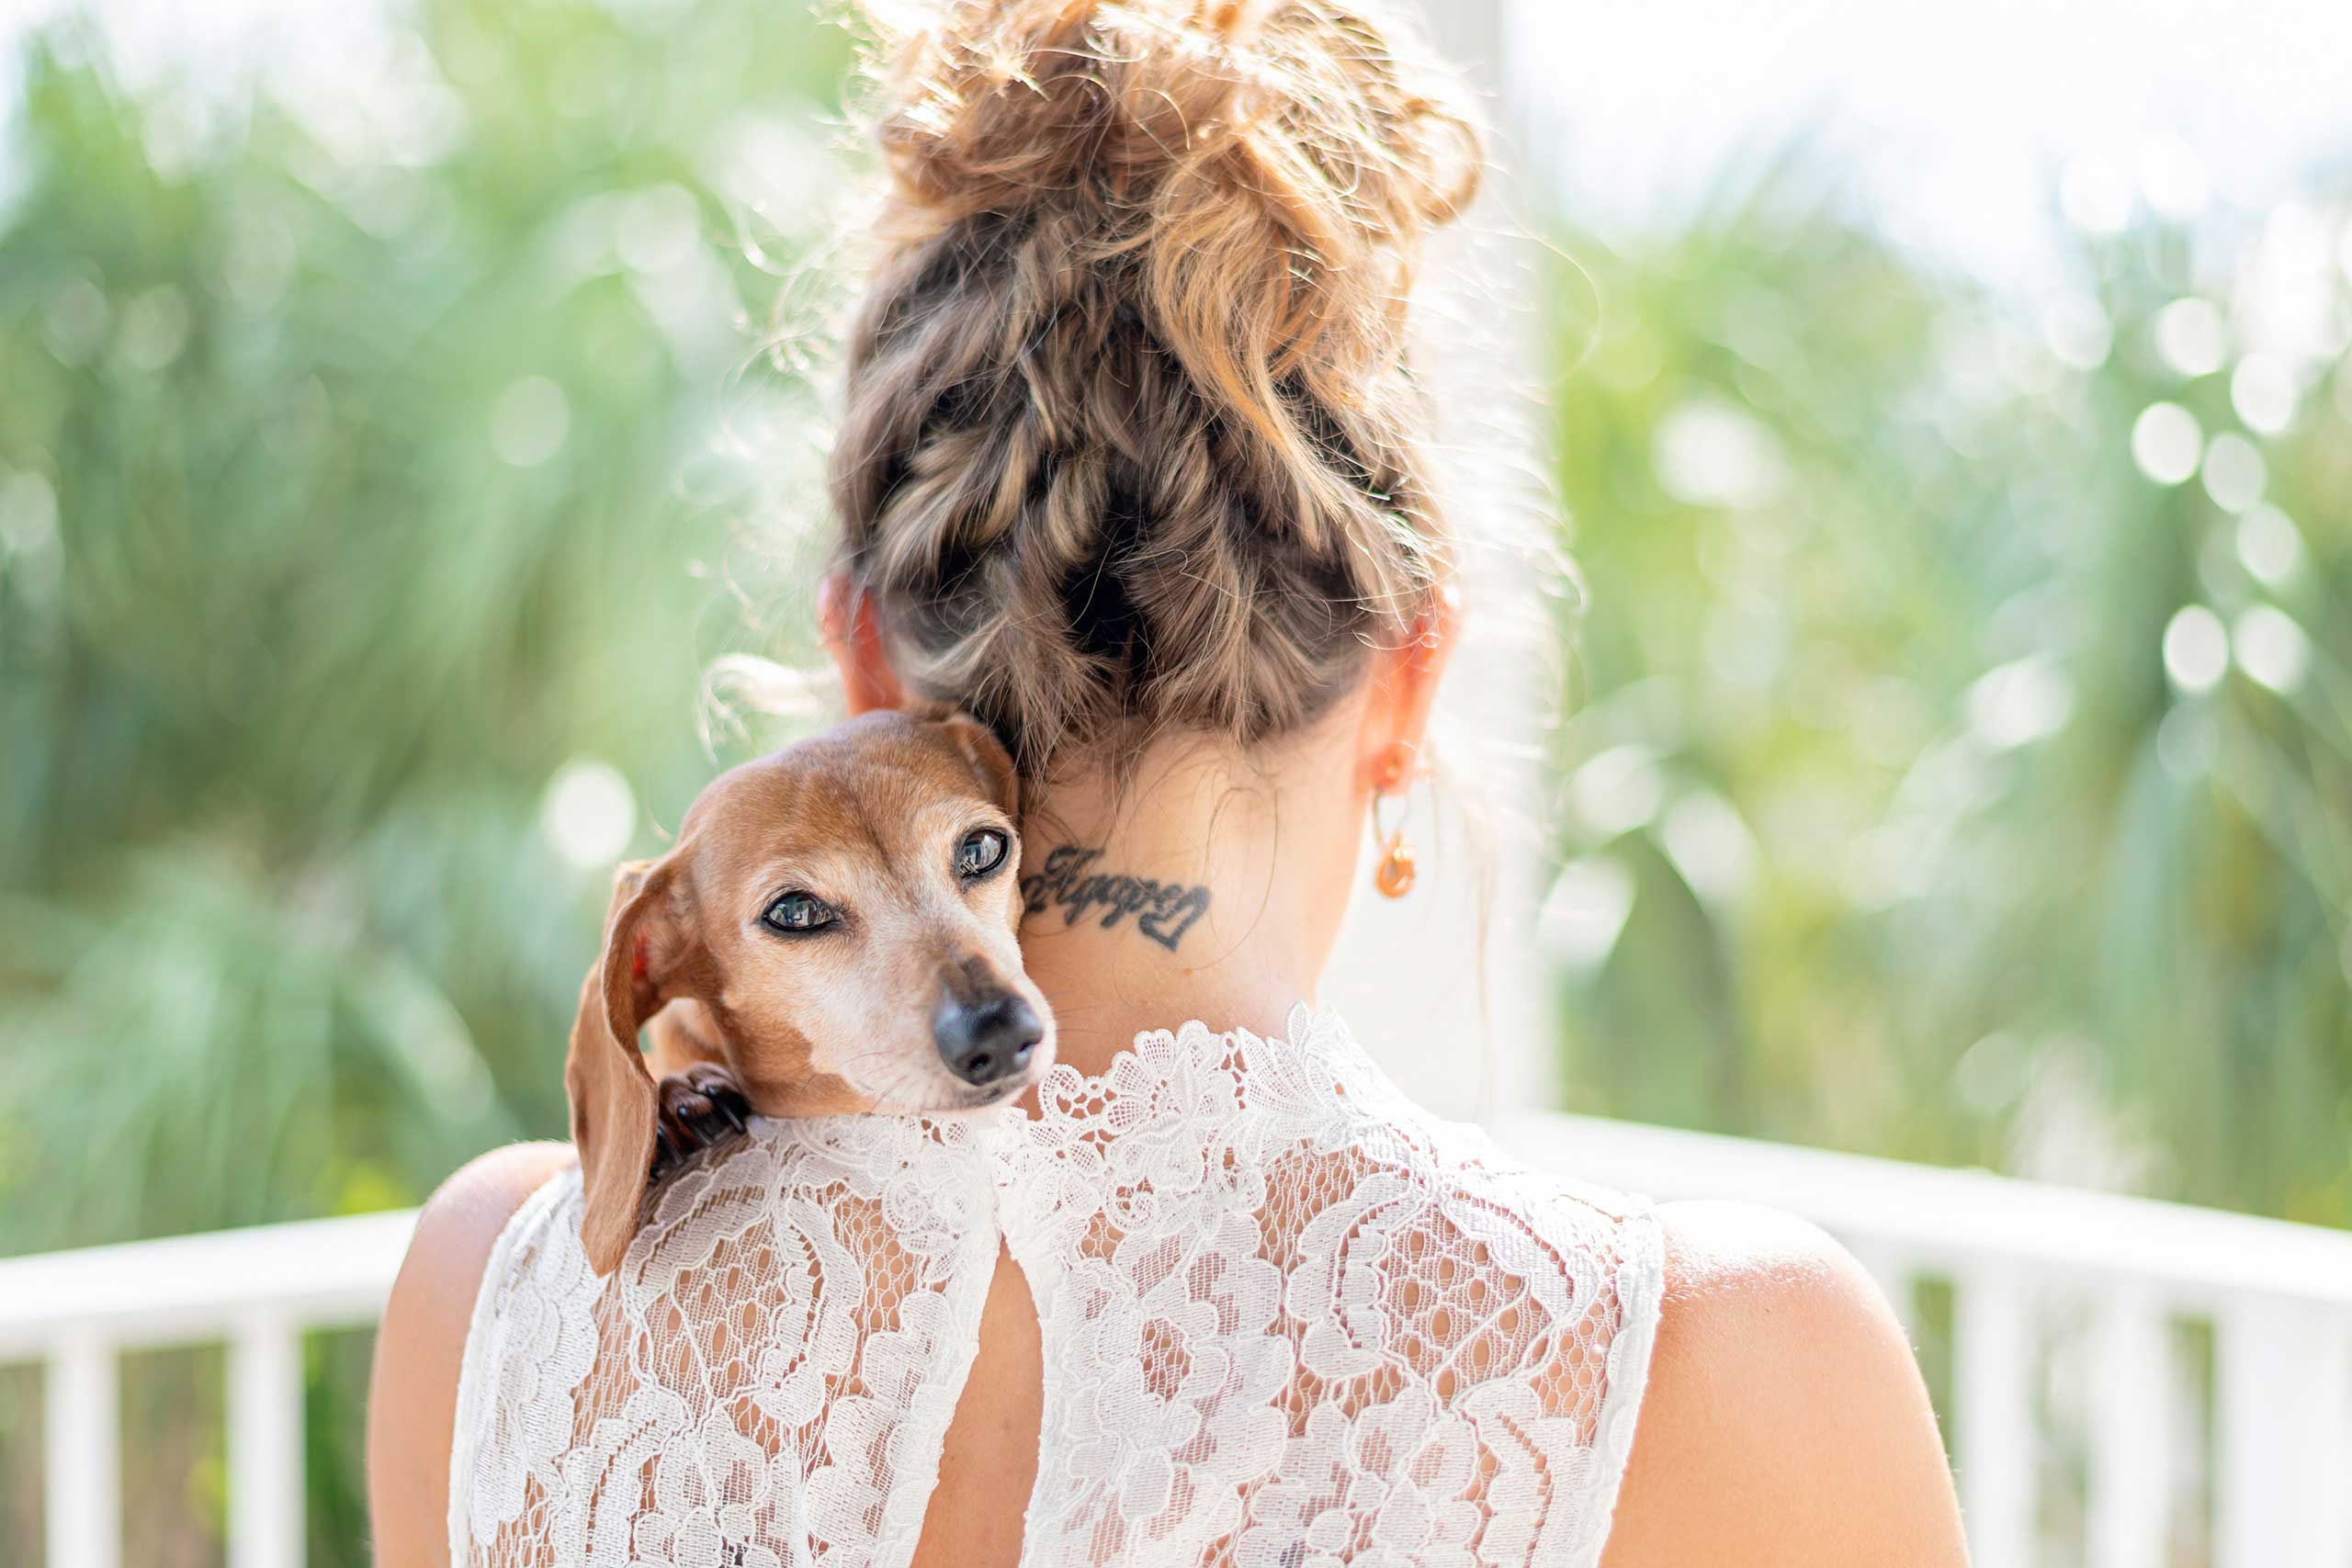 sensitive moment shared between bride and her dog captured by wedding photographer